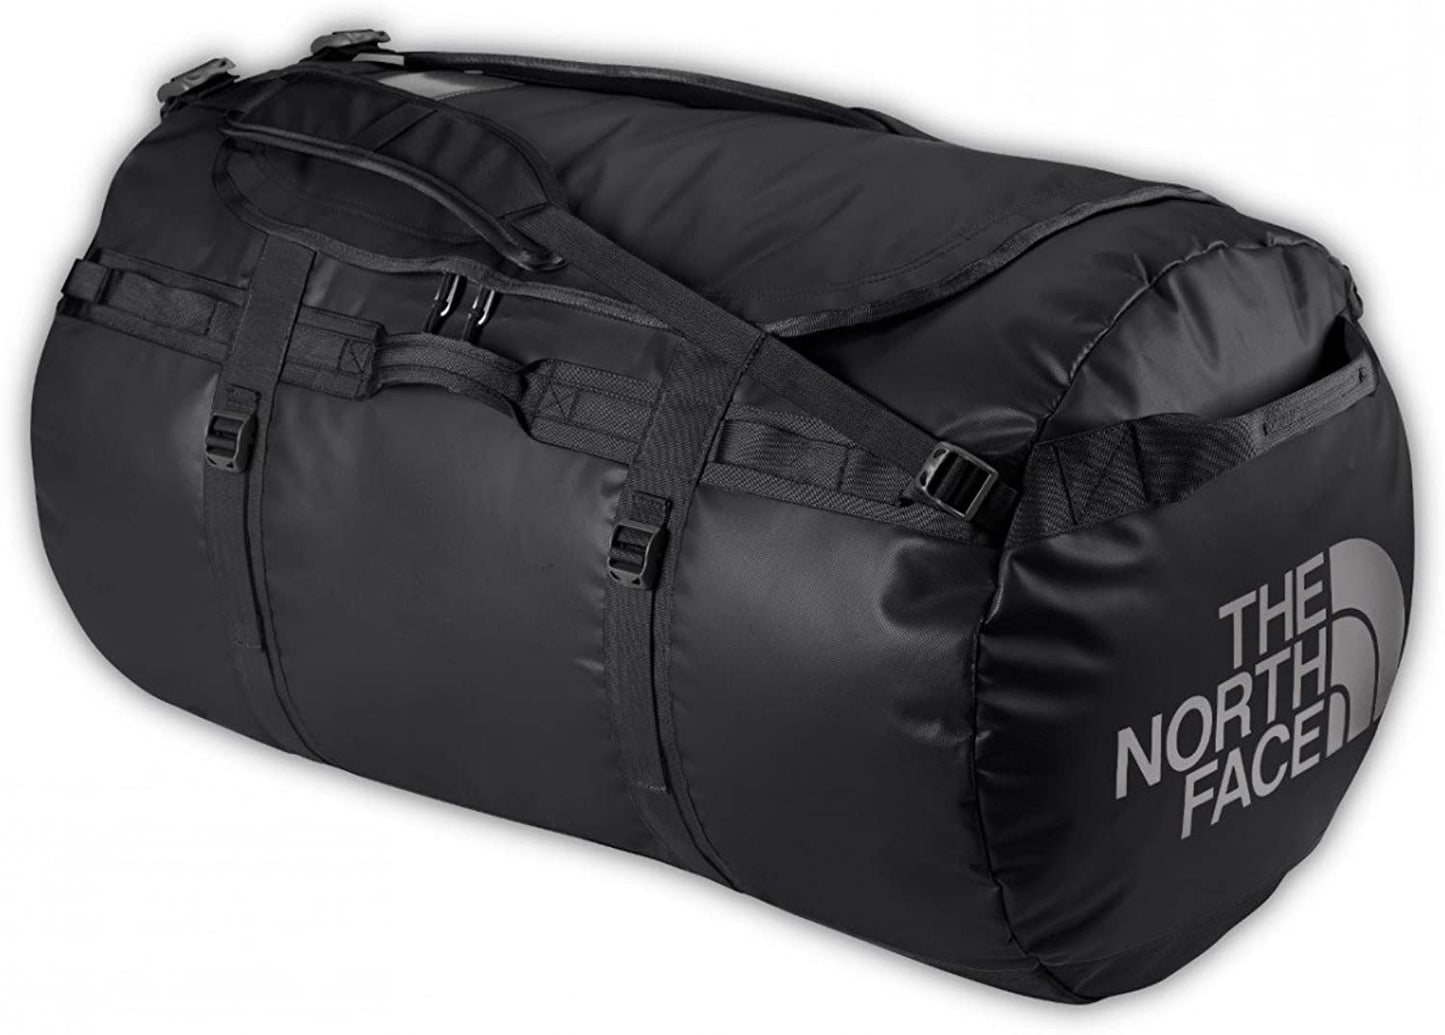 THE NORTH FACE BASECAMP TNF DUFFEL